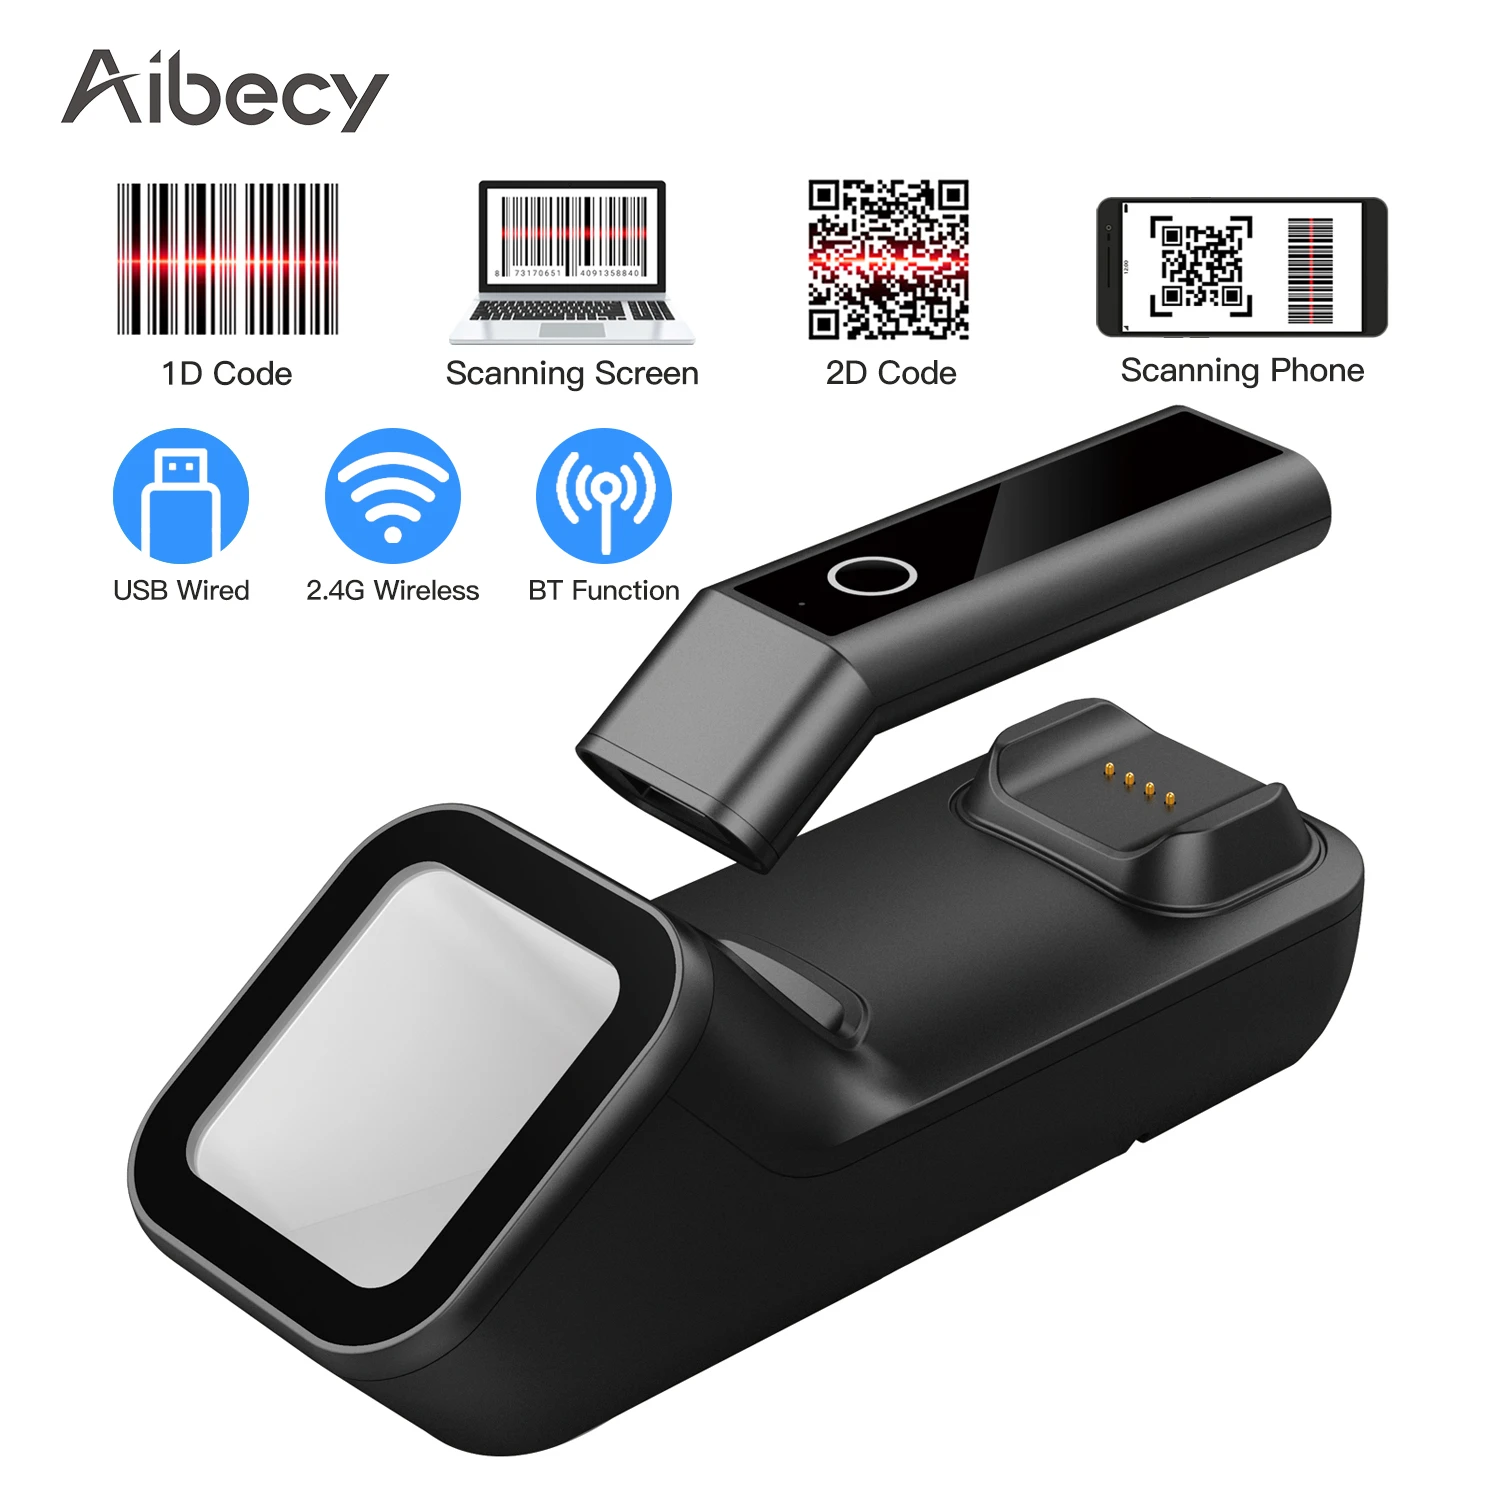 Aibecy 3-in-1 Barcode Scanner Handheld 1D/2D/QR Bar Code Reader  BT & 2.4G Wireless USB Wired Connection with Scanning Base mini scanner